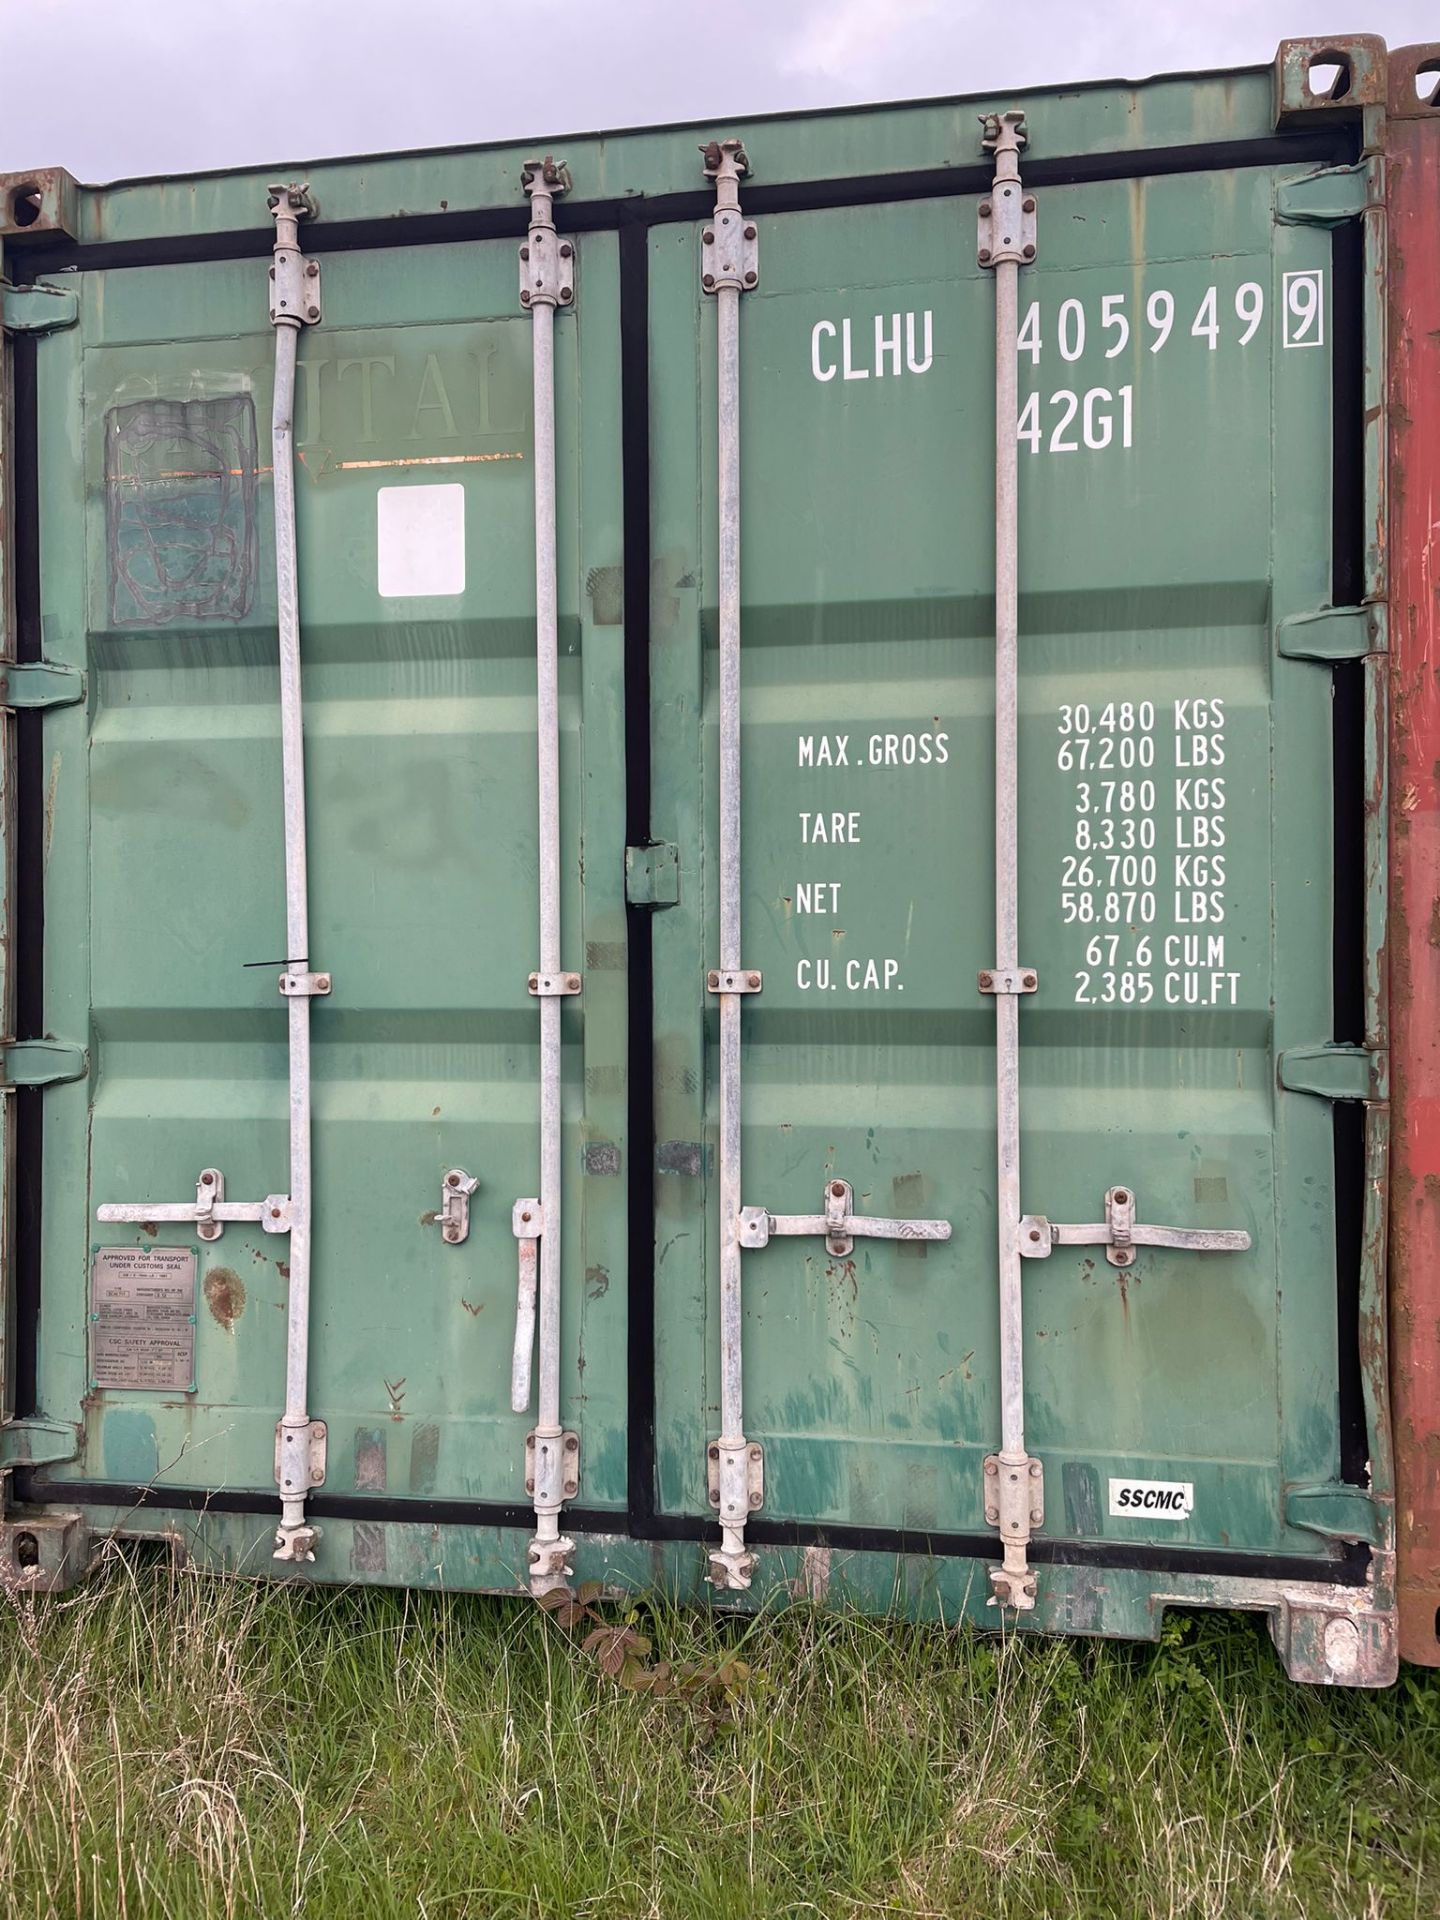 Shipping Container - ref CLHU4059499 - NO RESERVE (40’ GP - Standard)